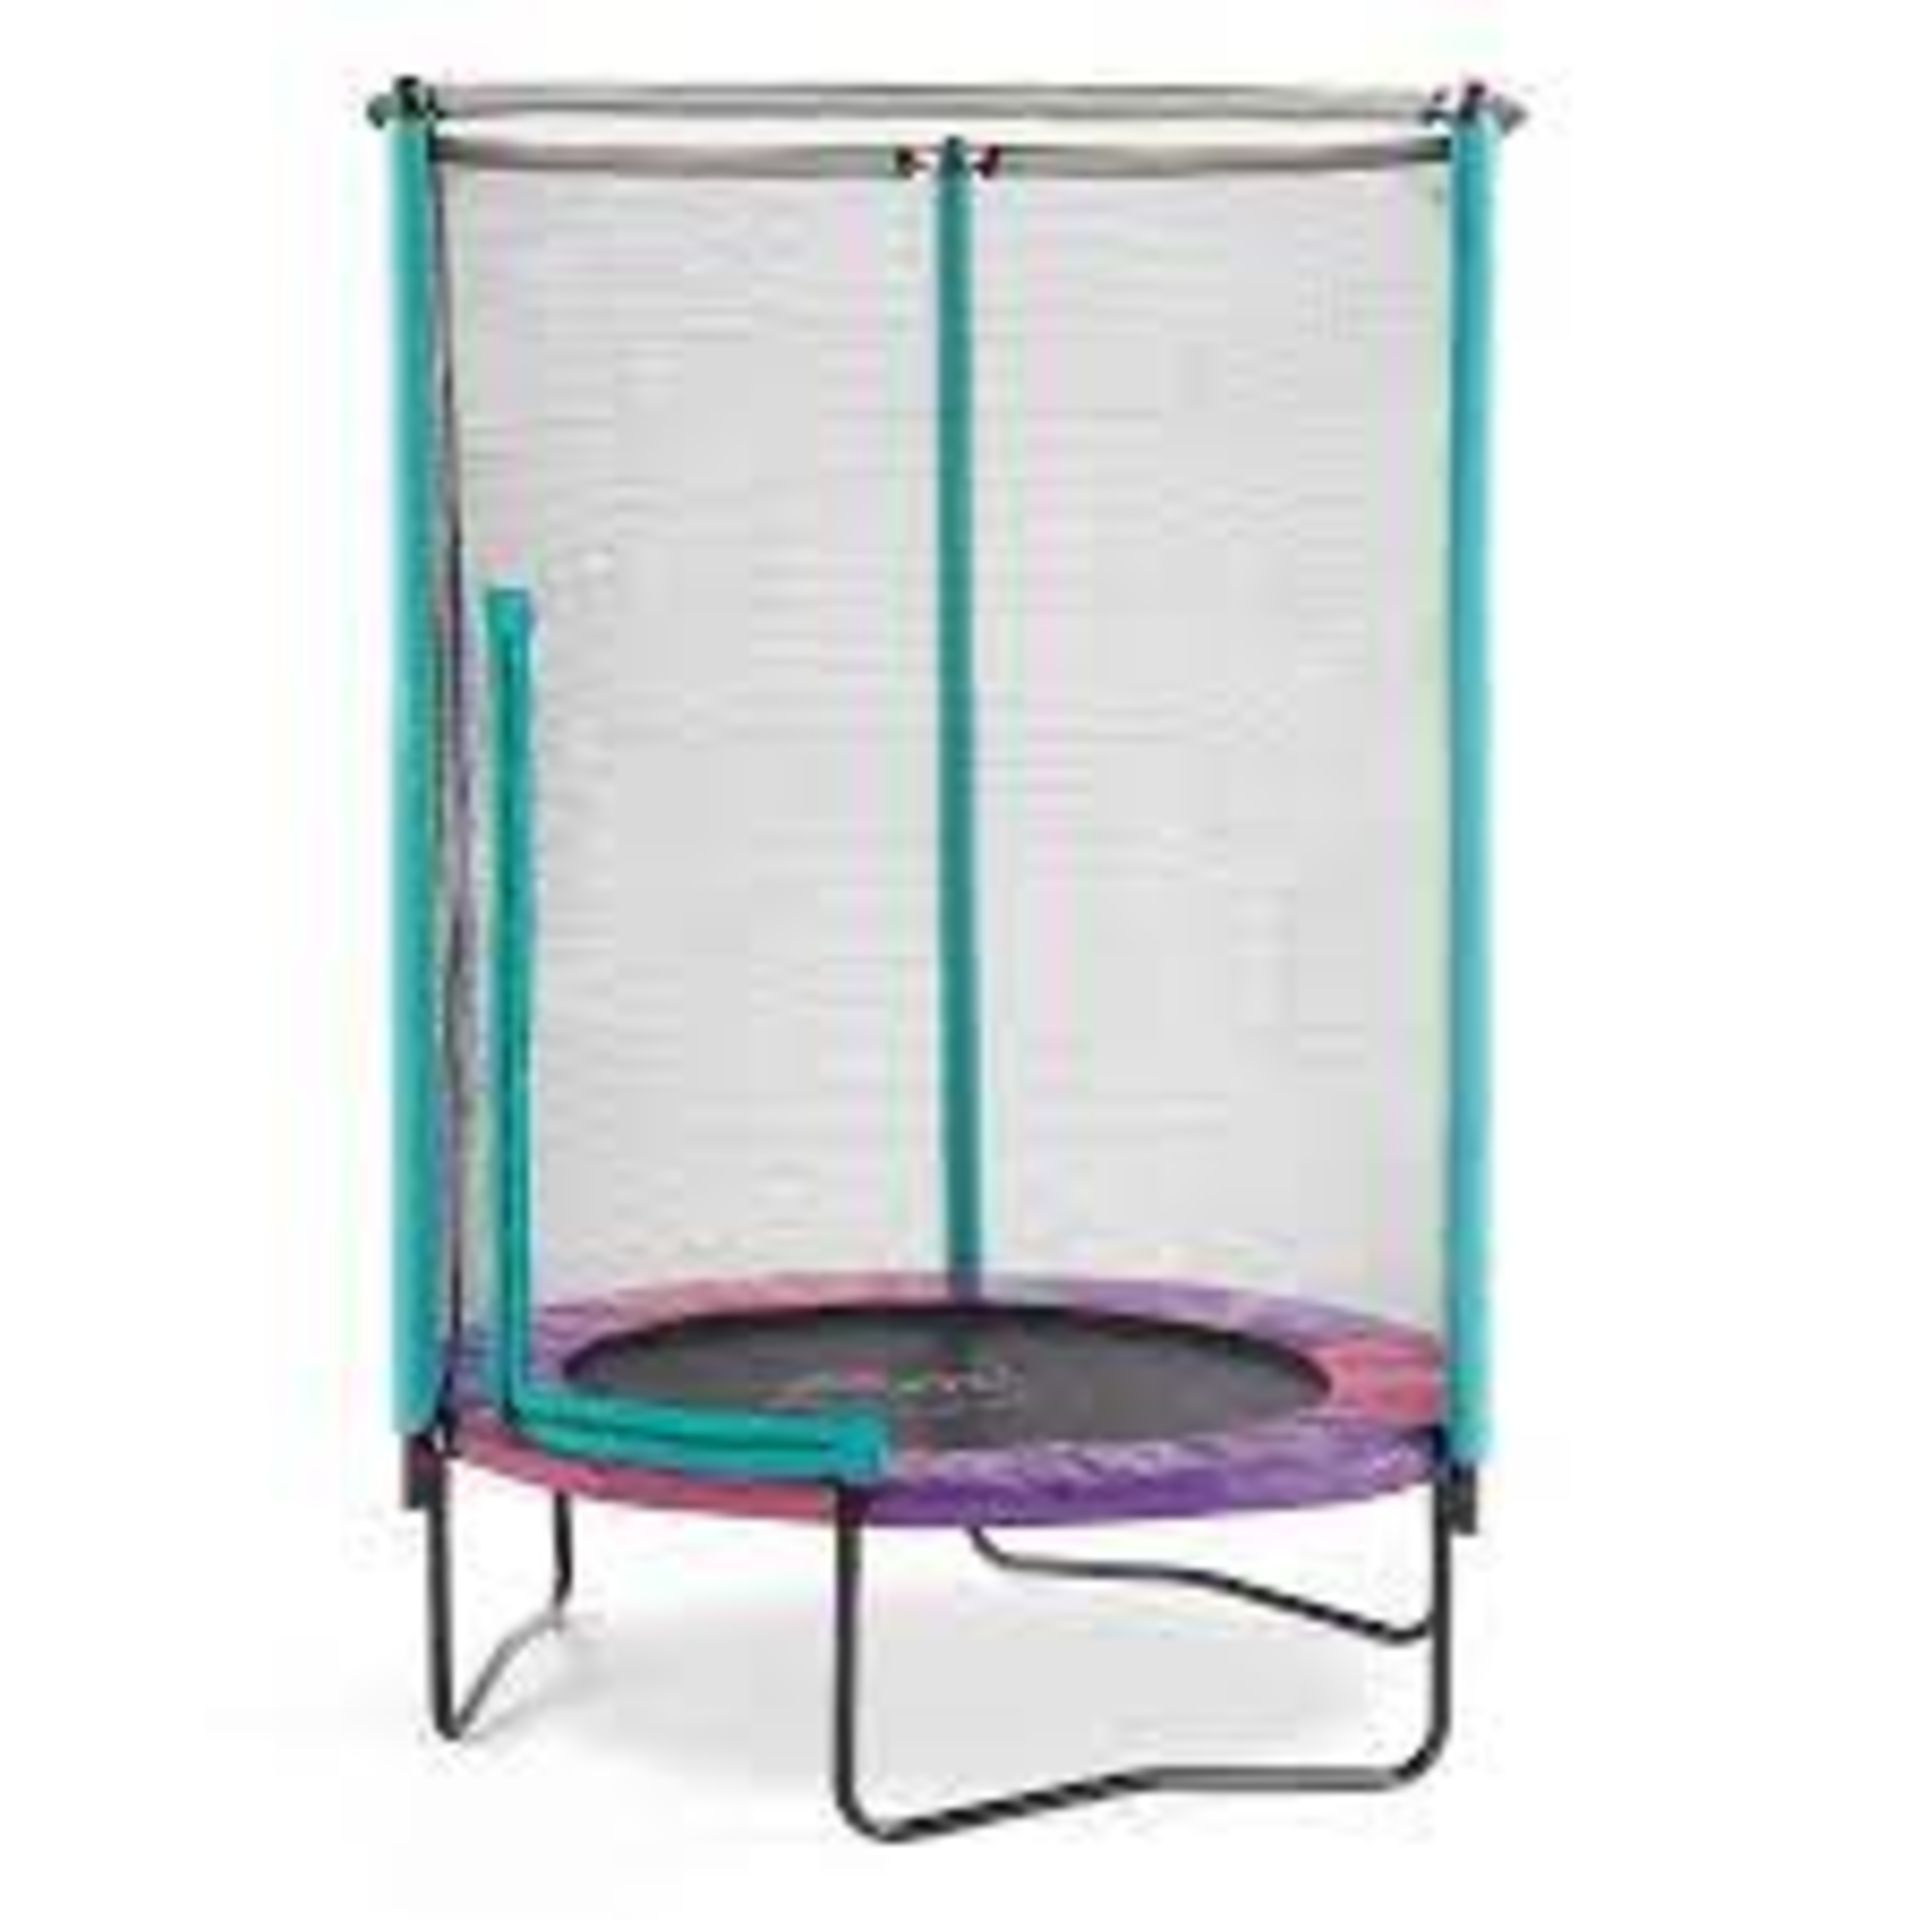 Plum Junior Trampoline & Enclosure. Reversible. 4.5ft.(ROW 18 mid) Specifically designed for young